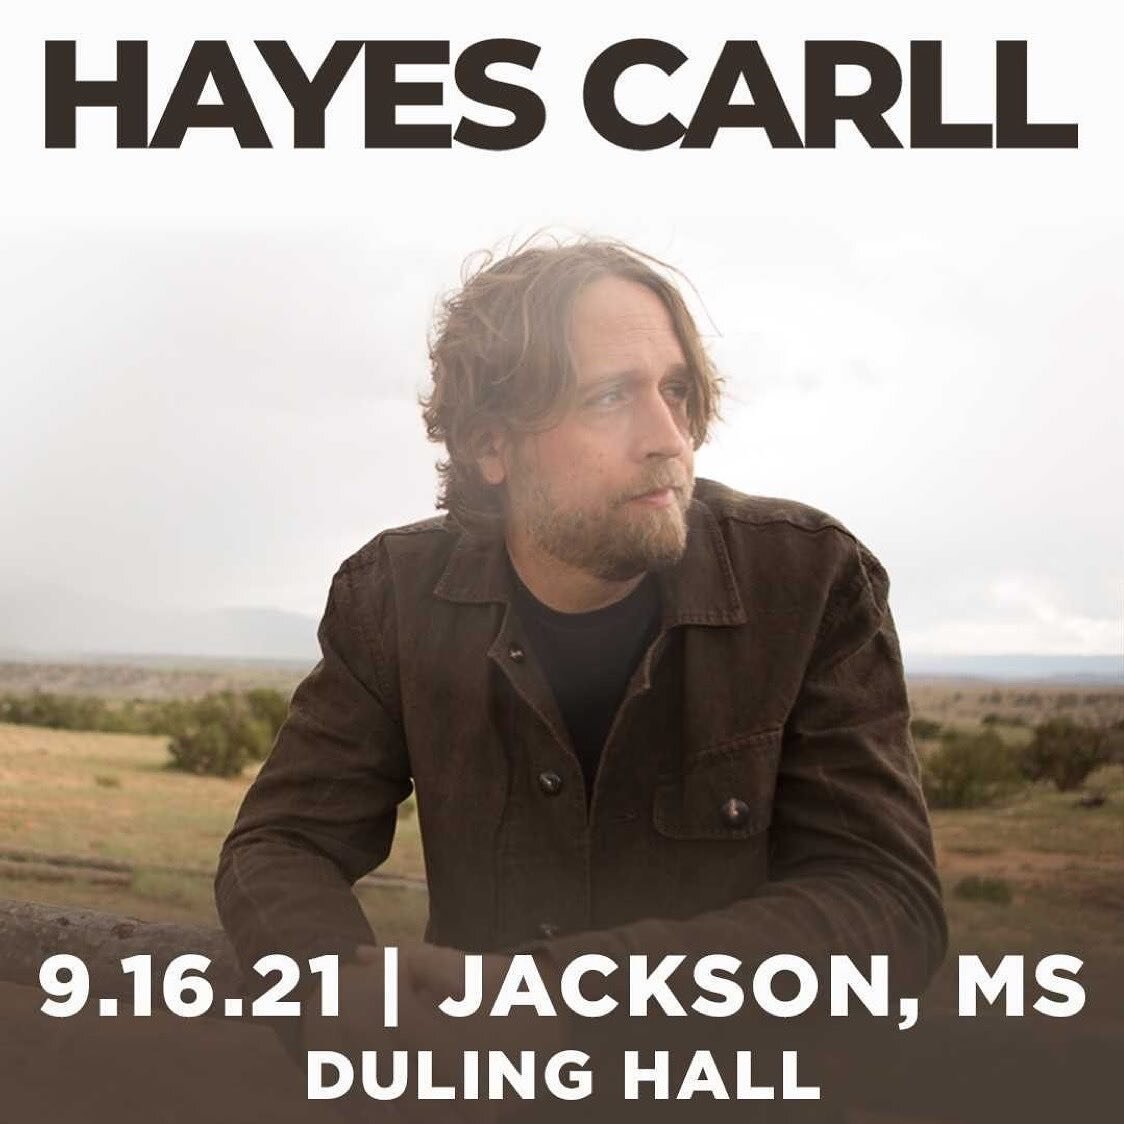 NEW SHOW (making up for lost time): @hayescarll will be live at @dulinghall on Thursday, September 16th!

&quot;Over the course of almost two decades and six albums, Carll has gained a reputation for his own way with words, as his straight-talking ly